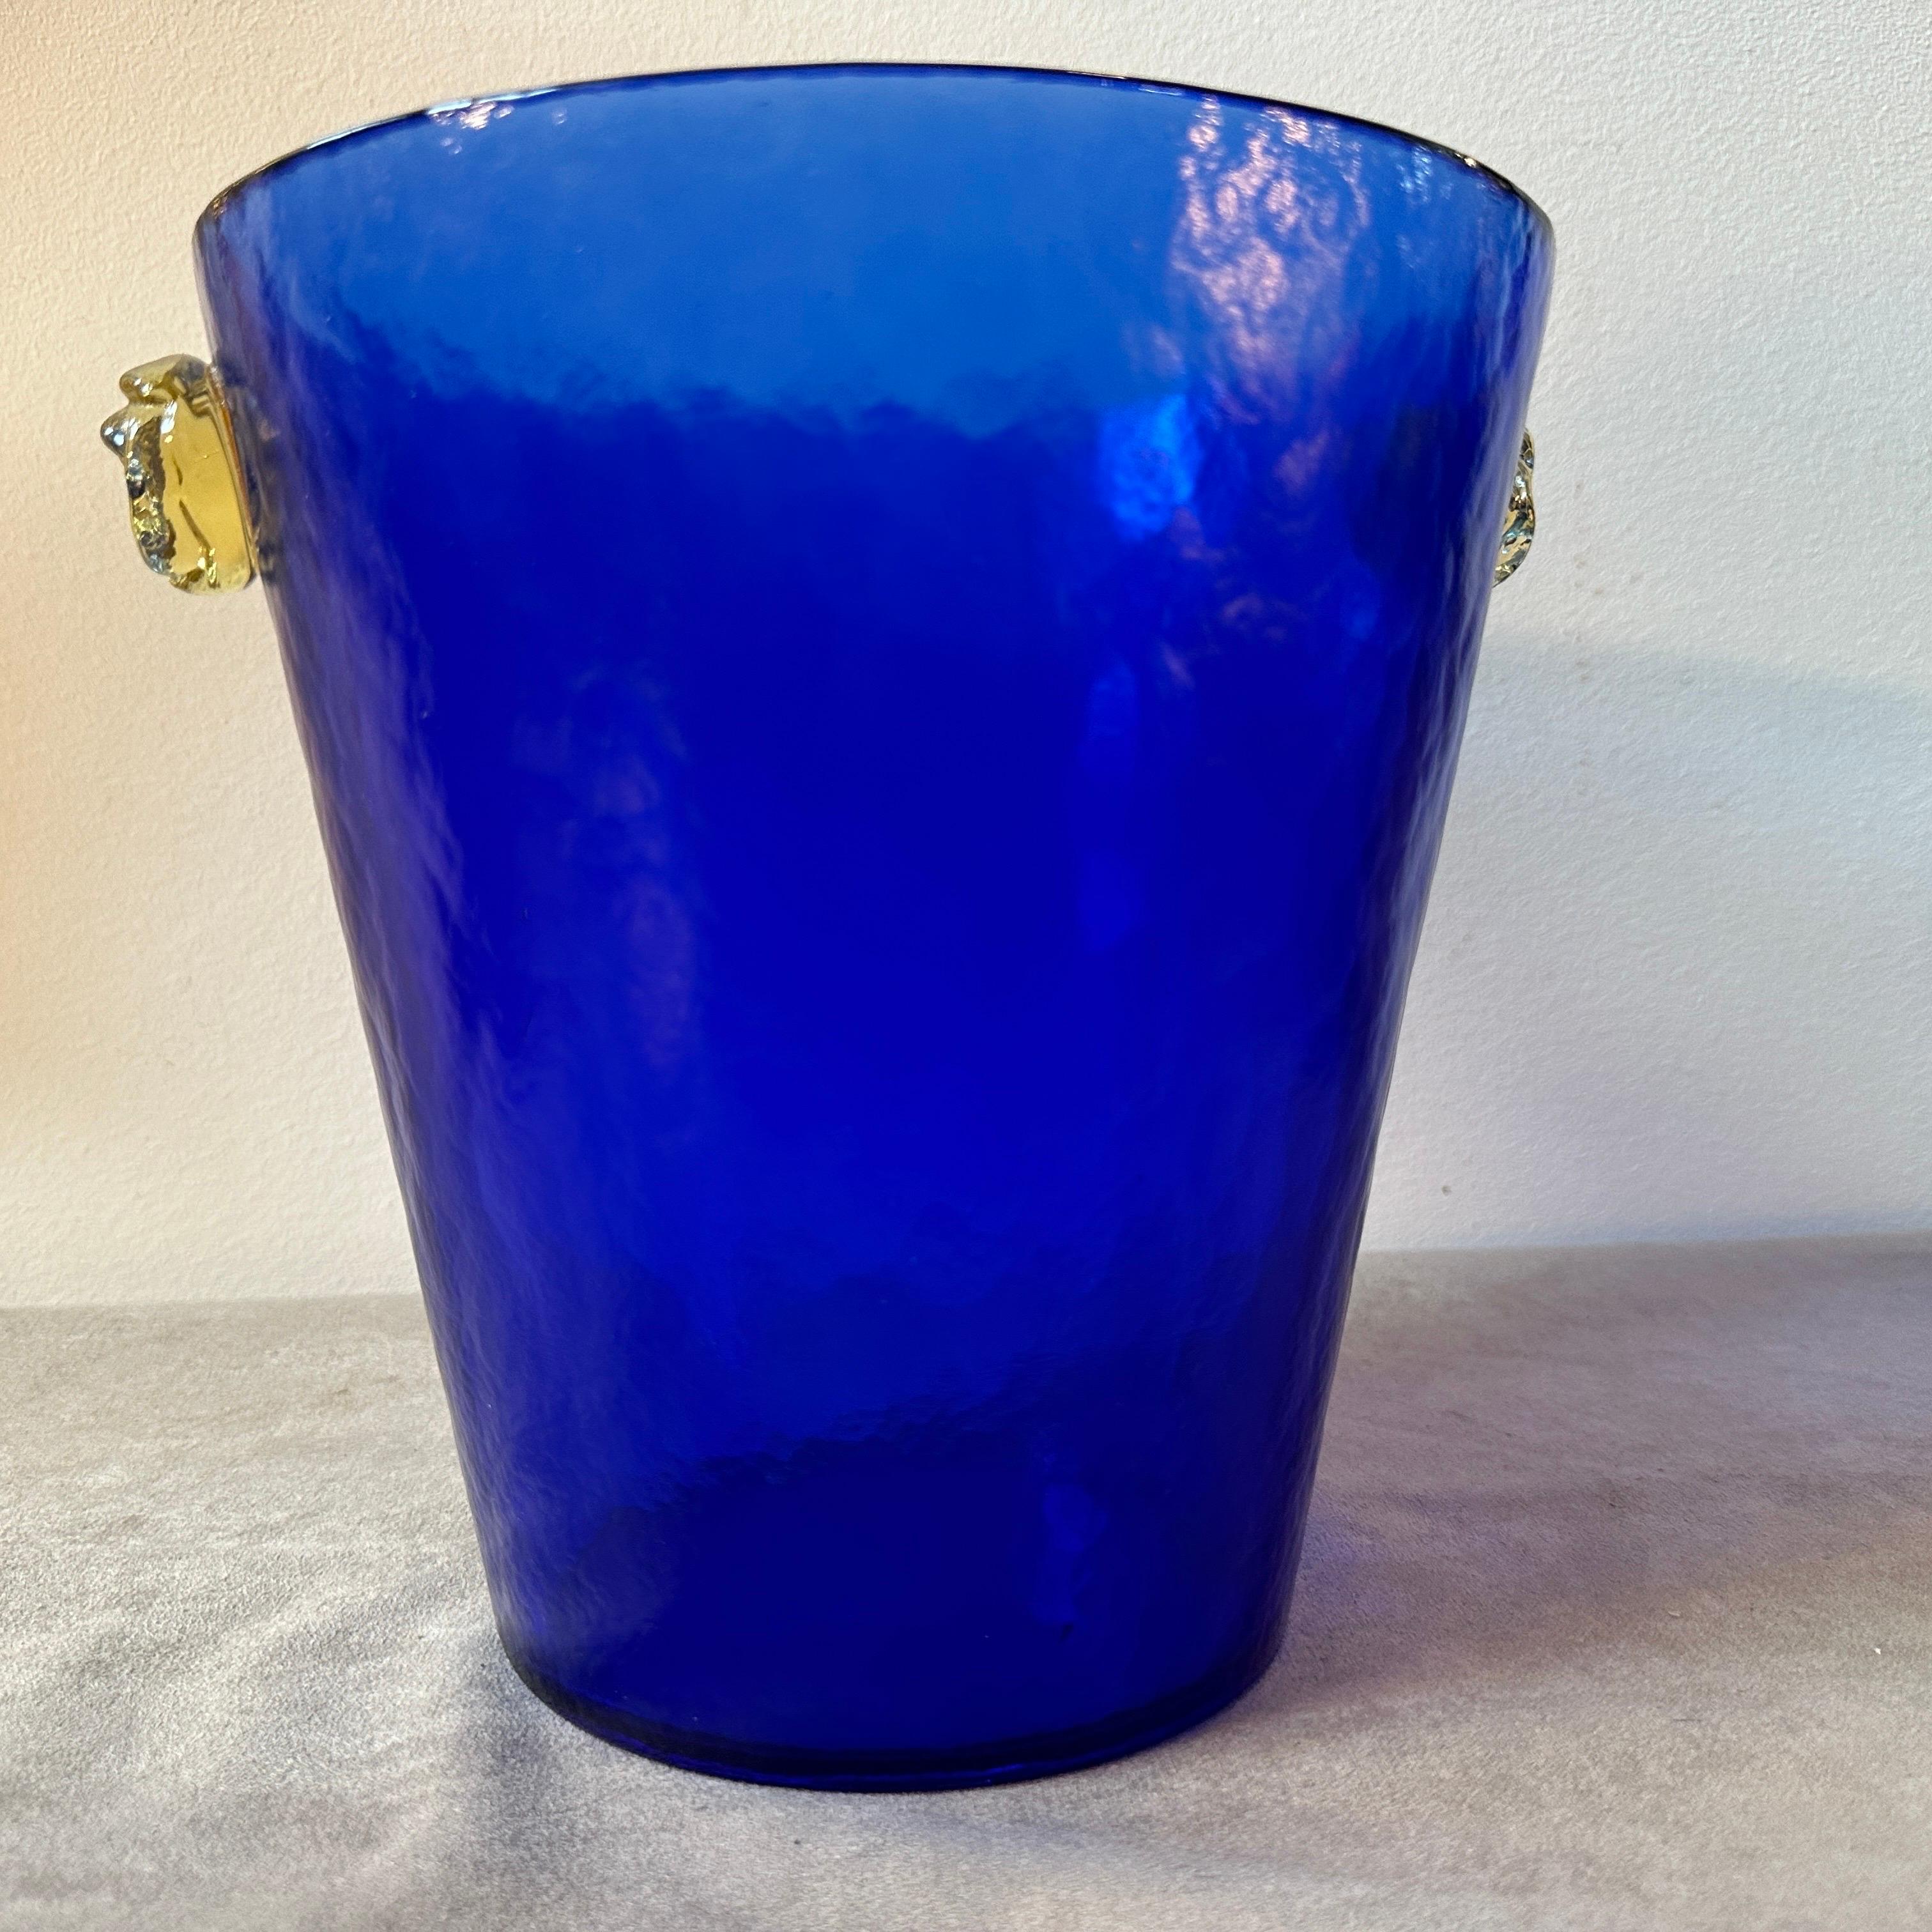 A modernist blue and yellow murano glass wine cooler designed and manufactured in Murano in the Eighties, it's labeled on a side and in perfect conditions. The Battuto technique of the wine cooler it has been used long time by Fulvio Bianconi per